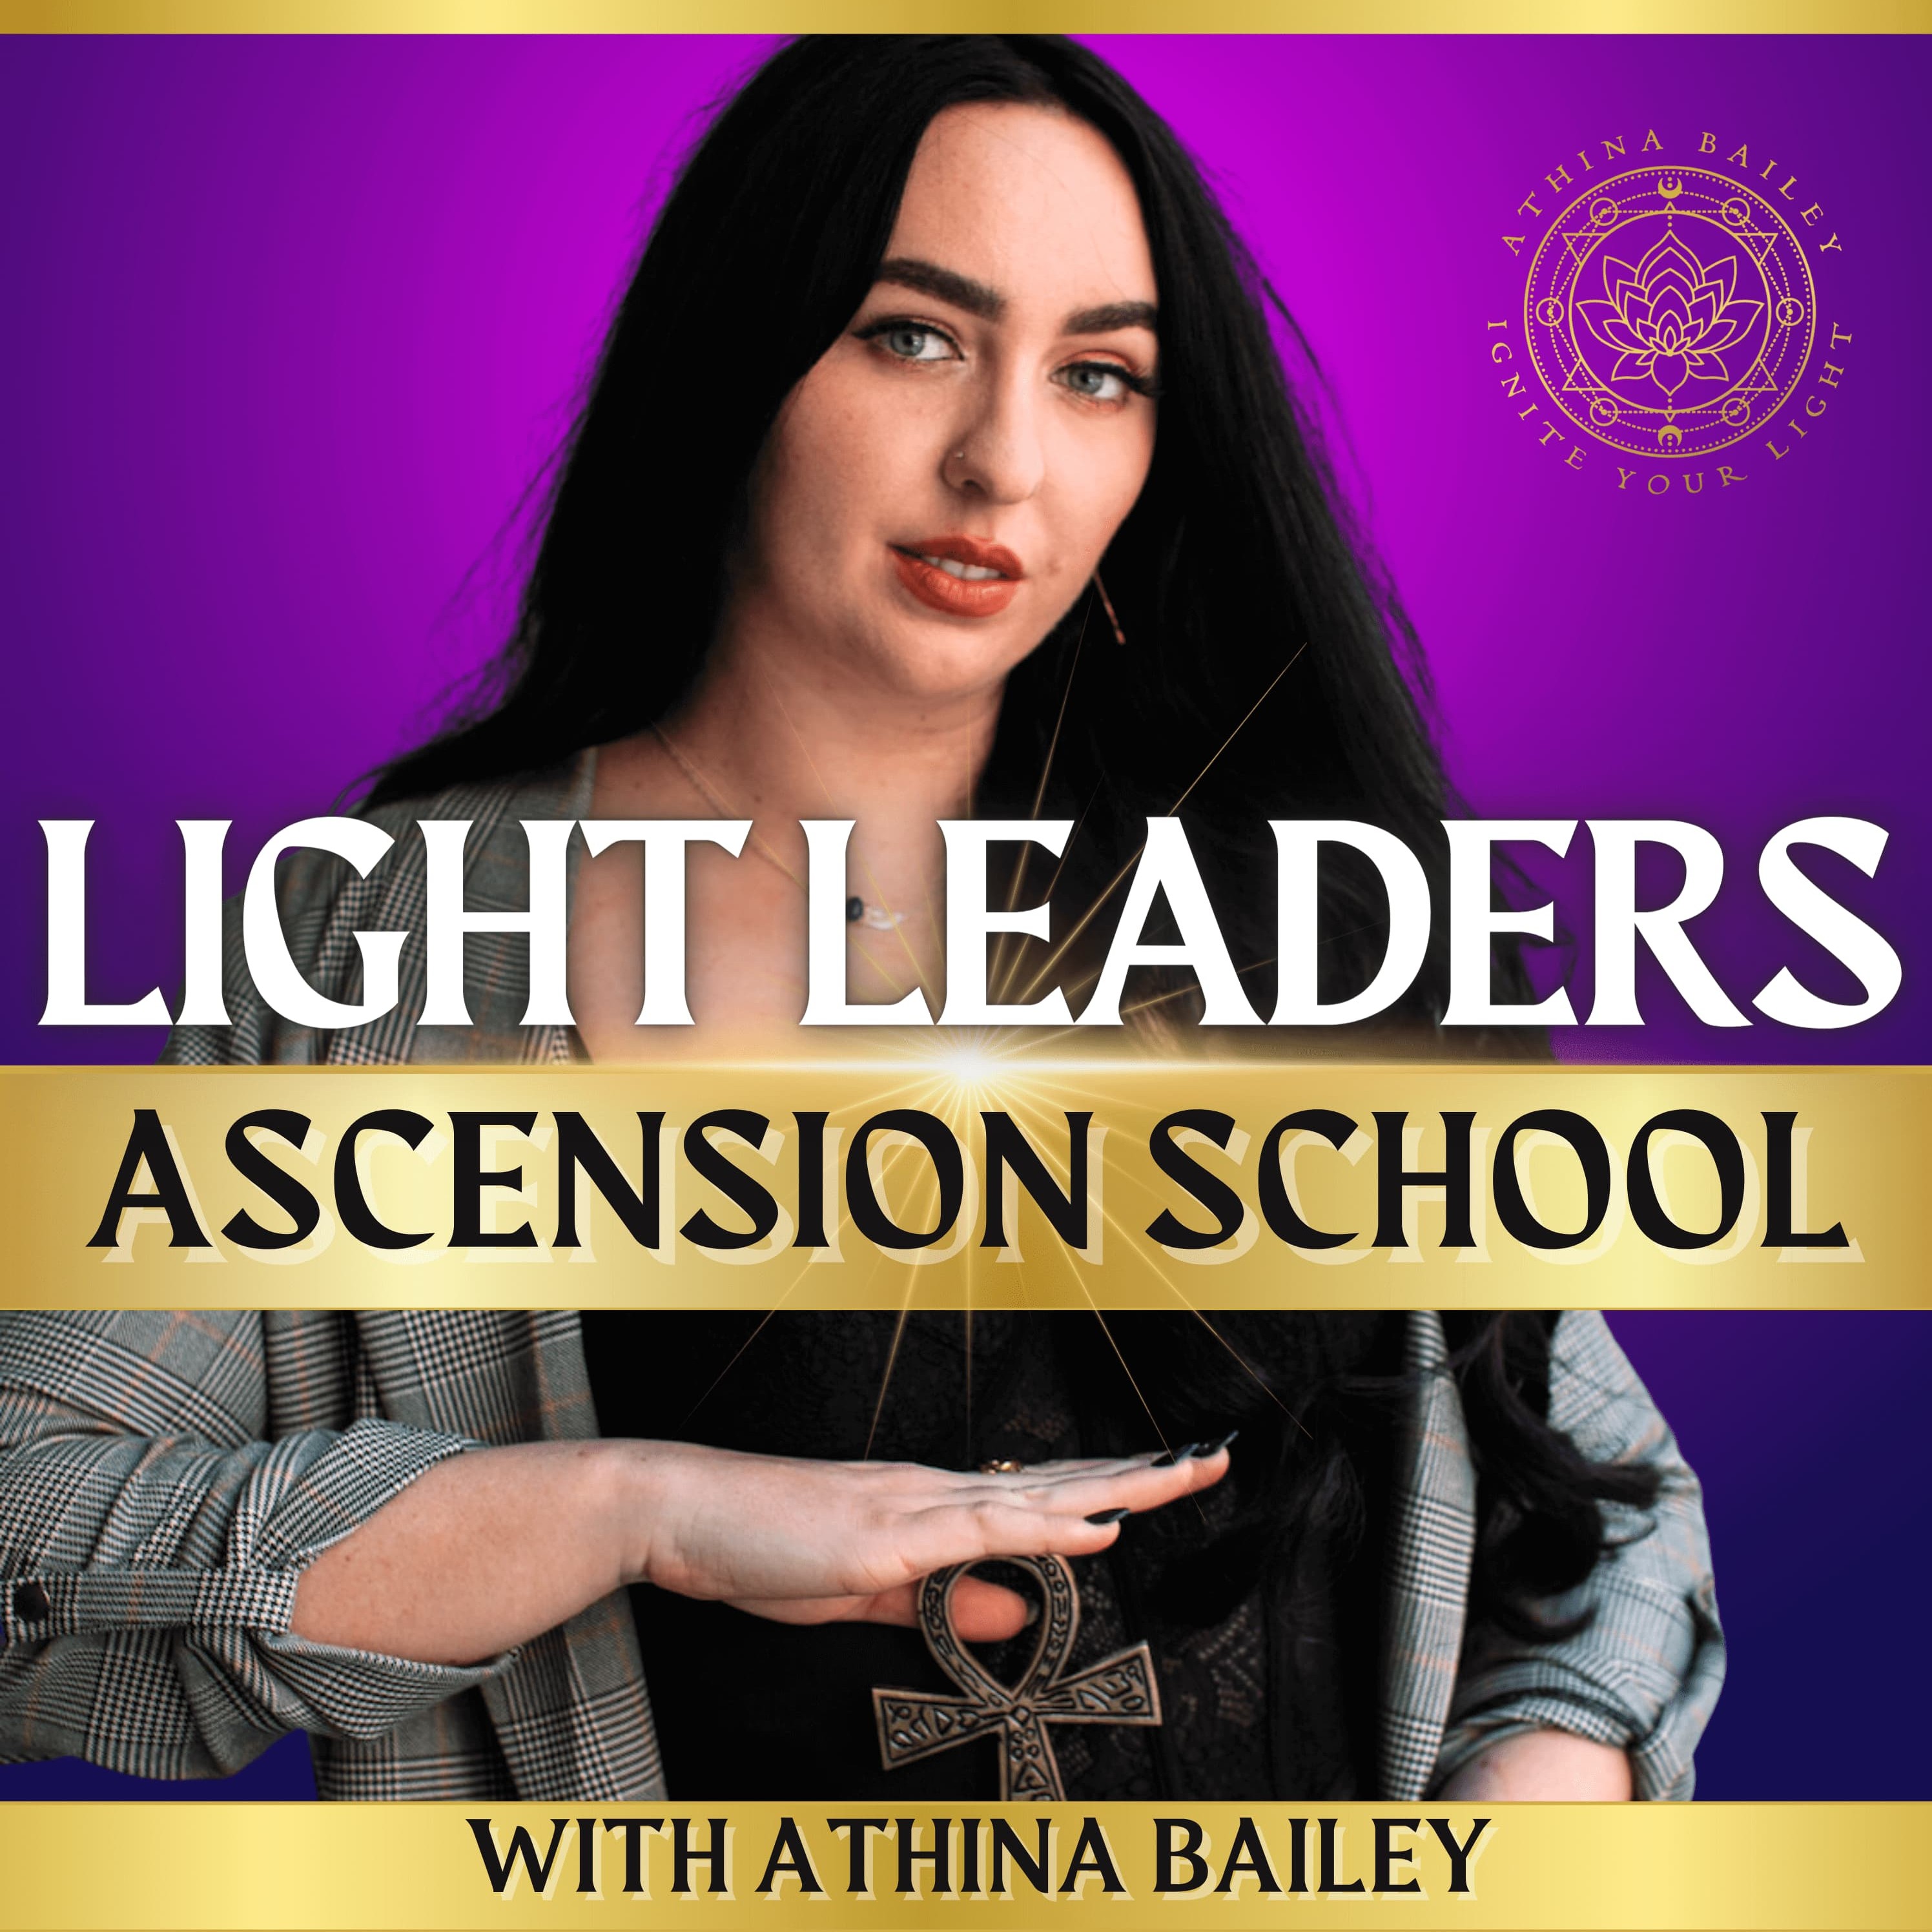 Light Leaders Ascension School with Athina Bailey